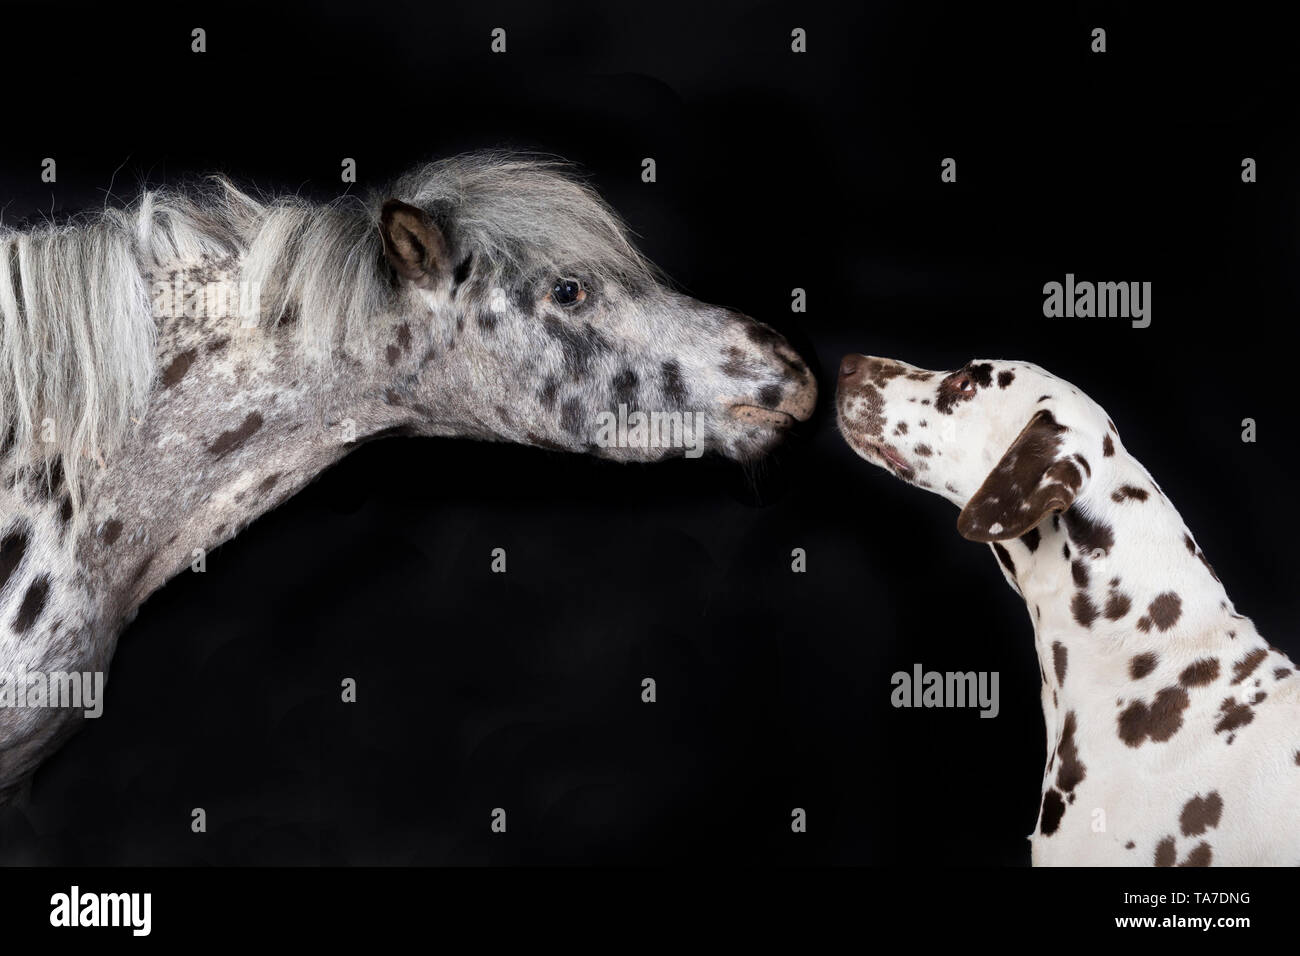 Miniature Appaloosa and Dalmatian dog. Adult horse and adult dog nose-to-nose. Studio picture against a black background. Germany Stock Photo